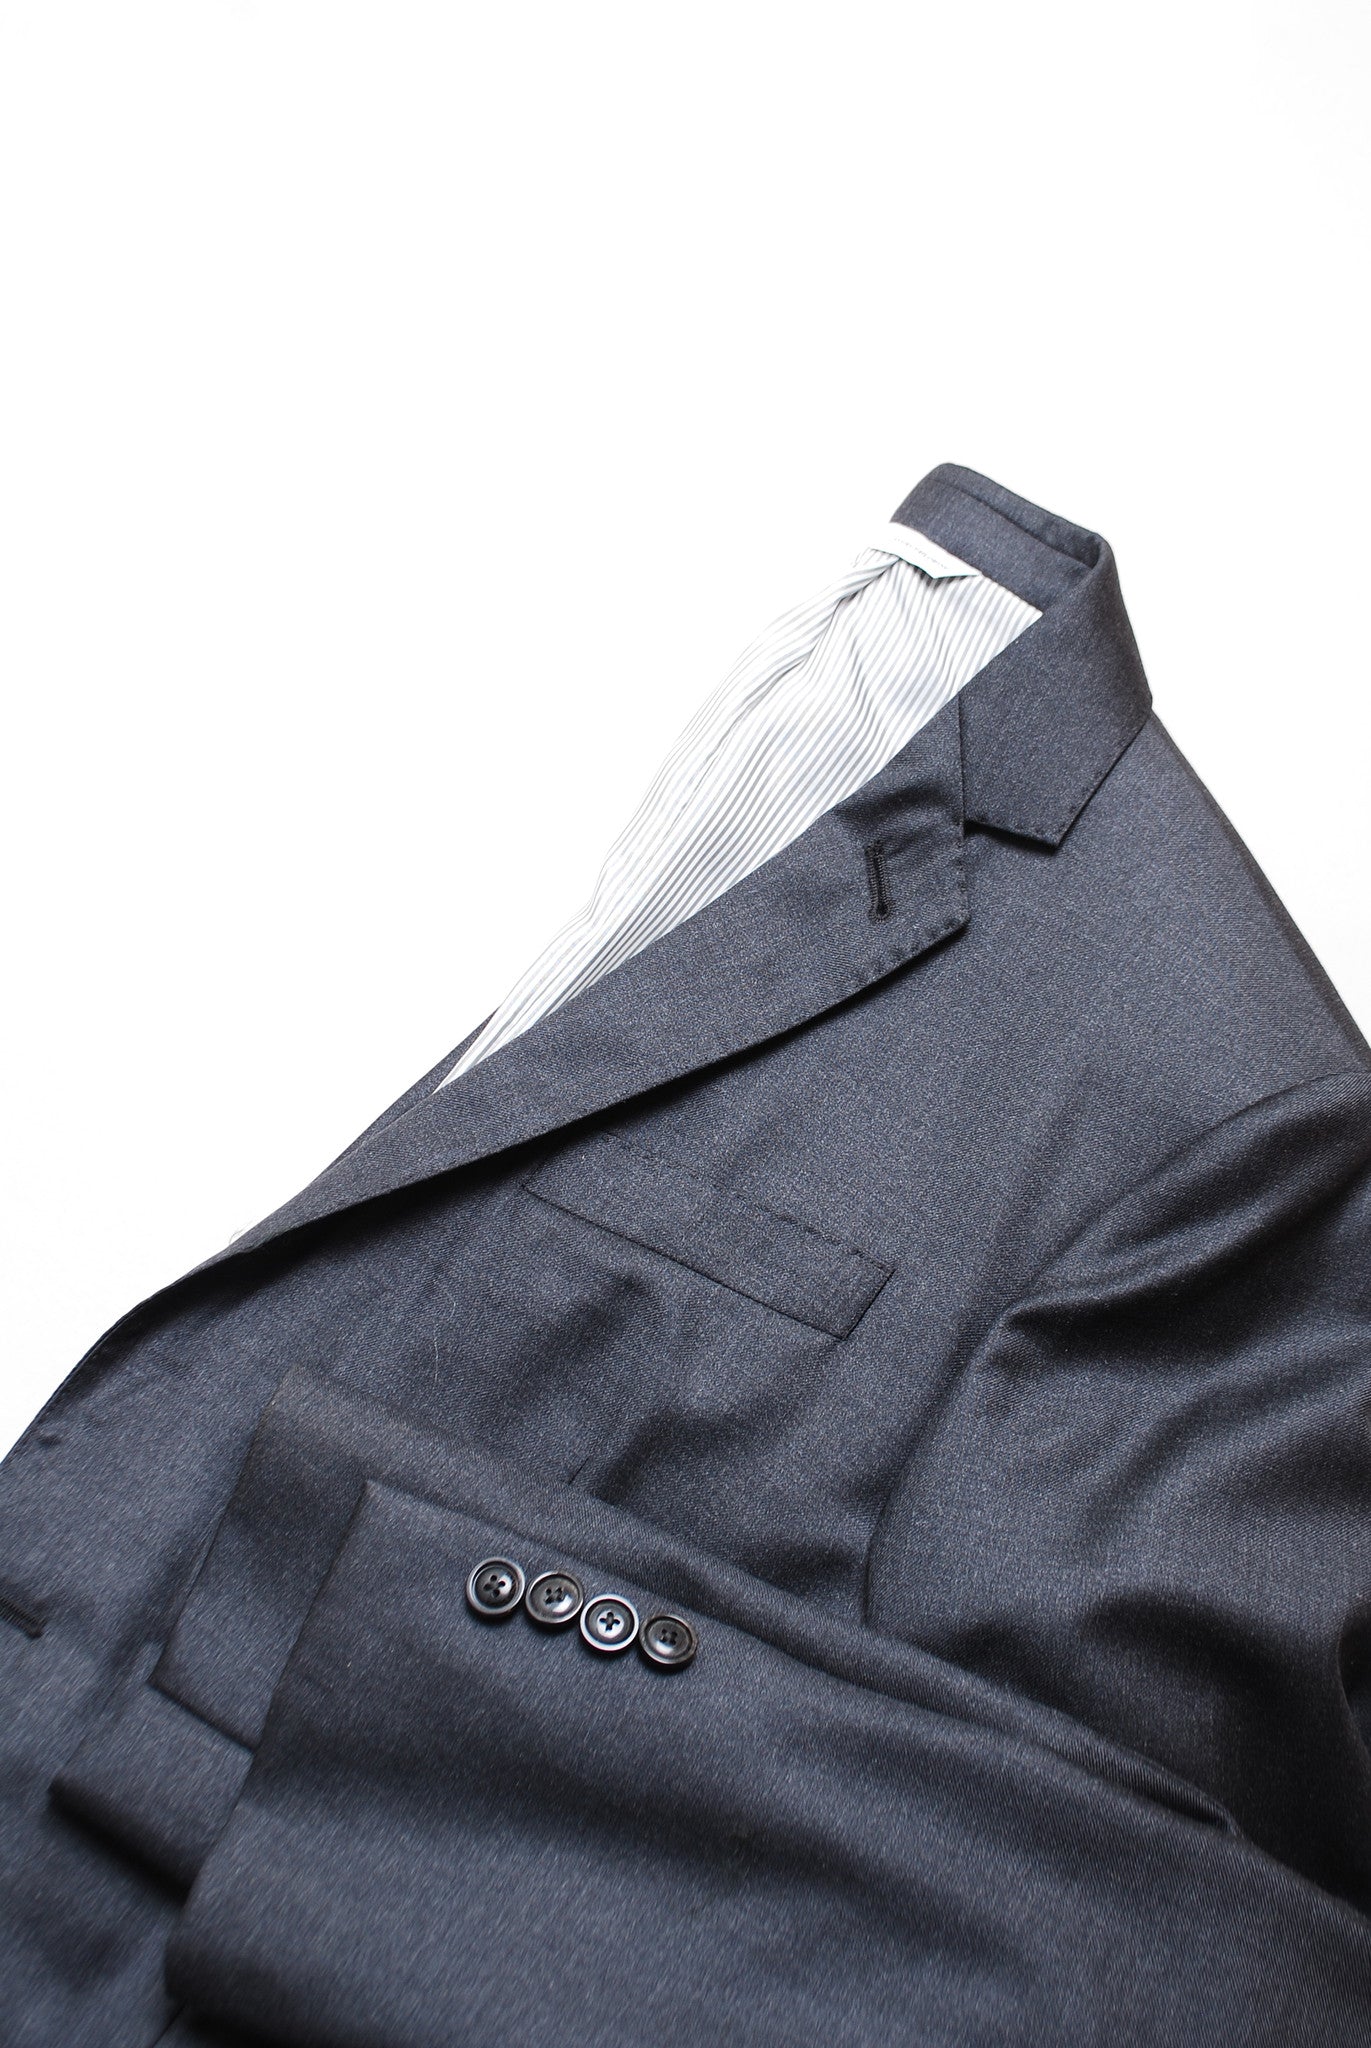 FINAL SALE: 2020 Version BKT50 Tailored Jacket in Super 110s Twill - Charcoal